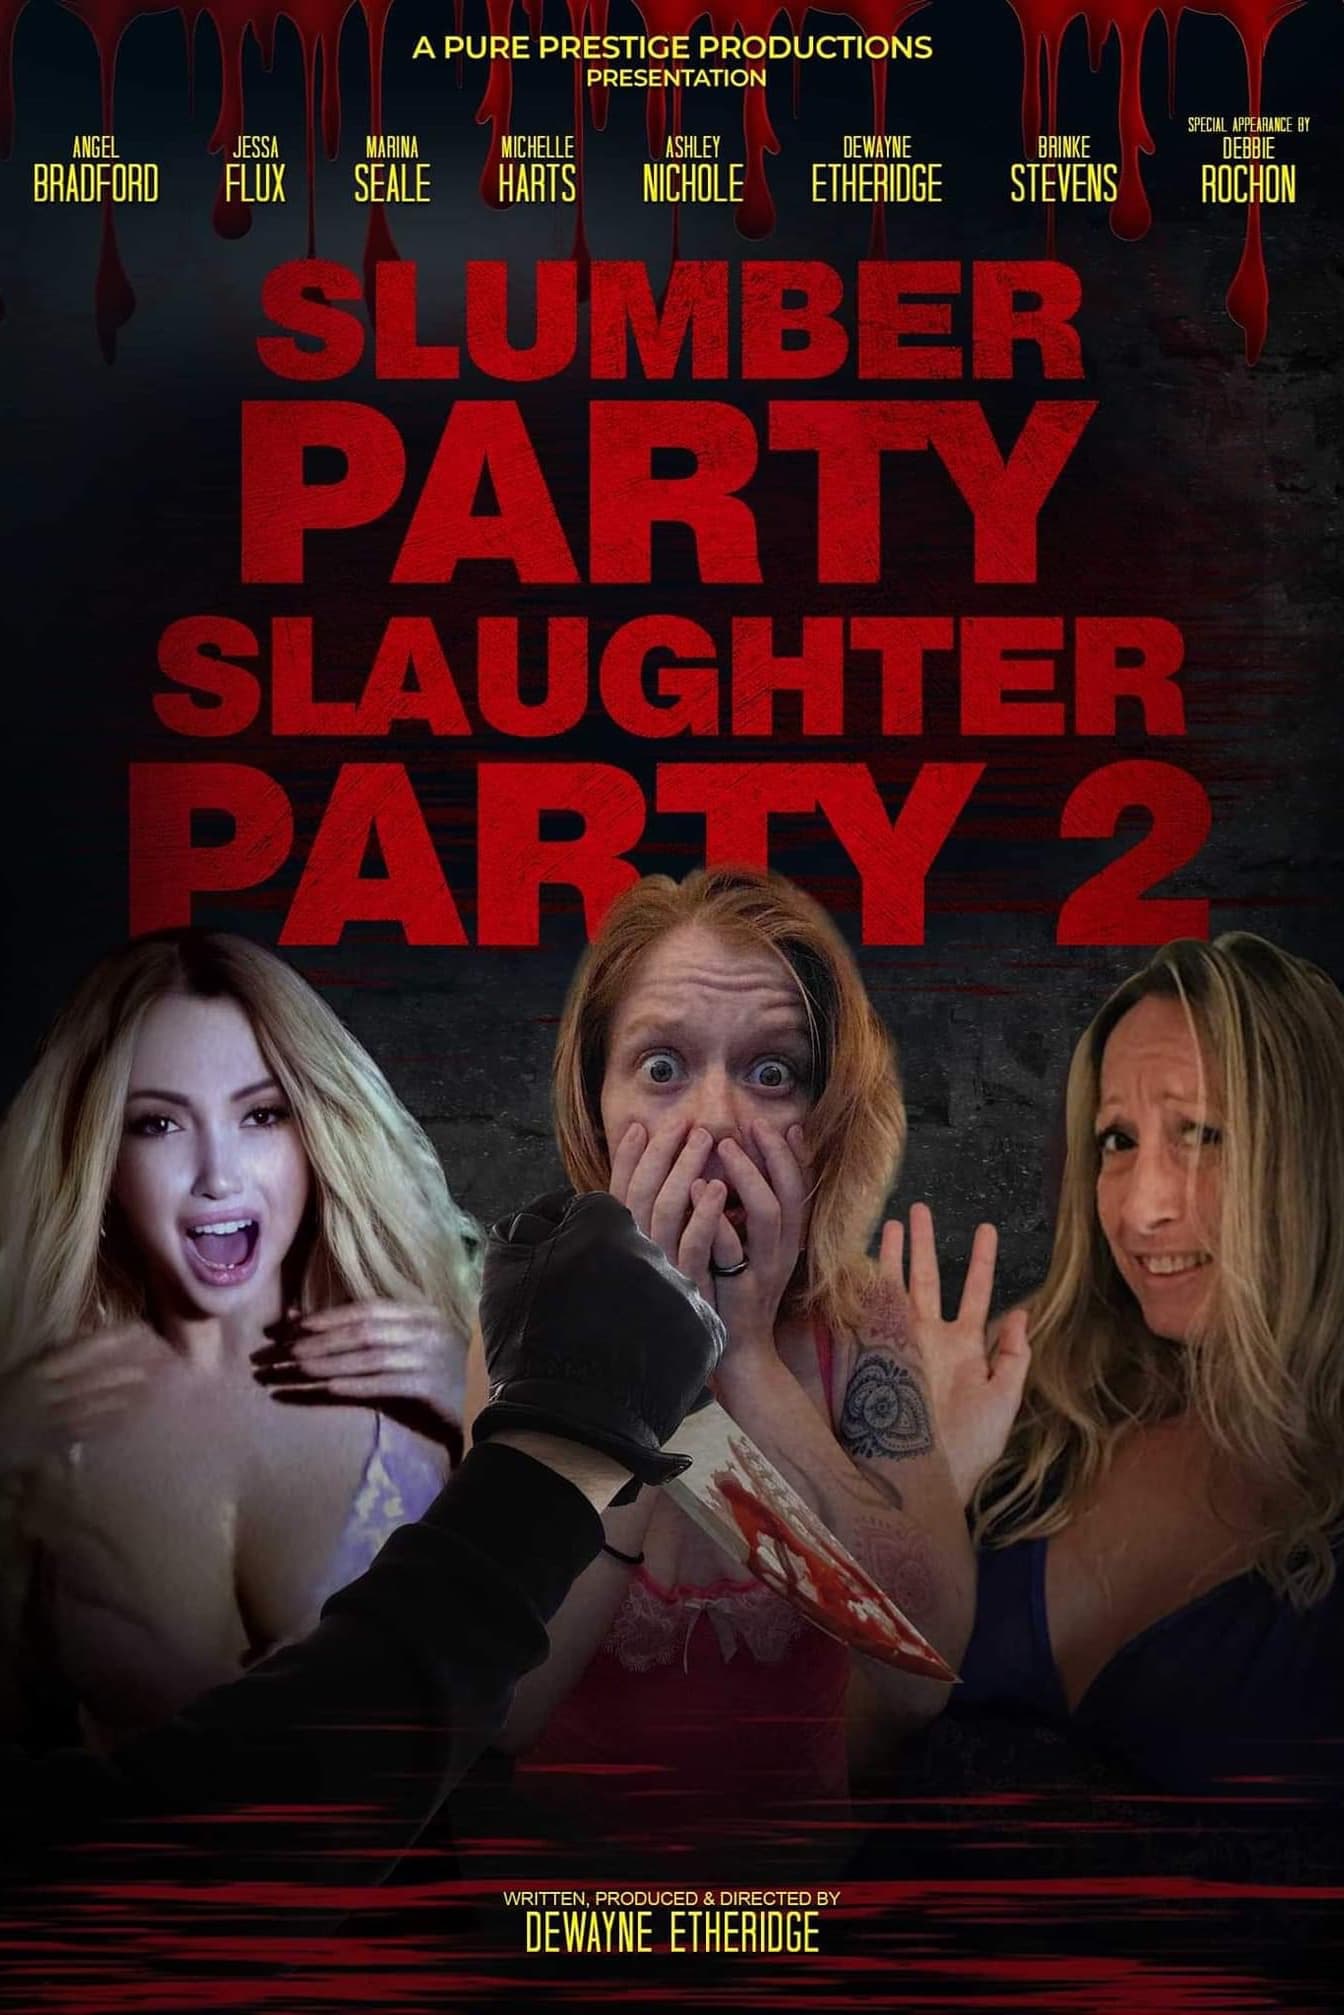 Slumber Party Slaughter Party 2